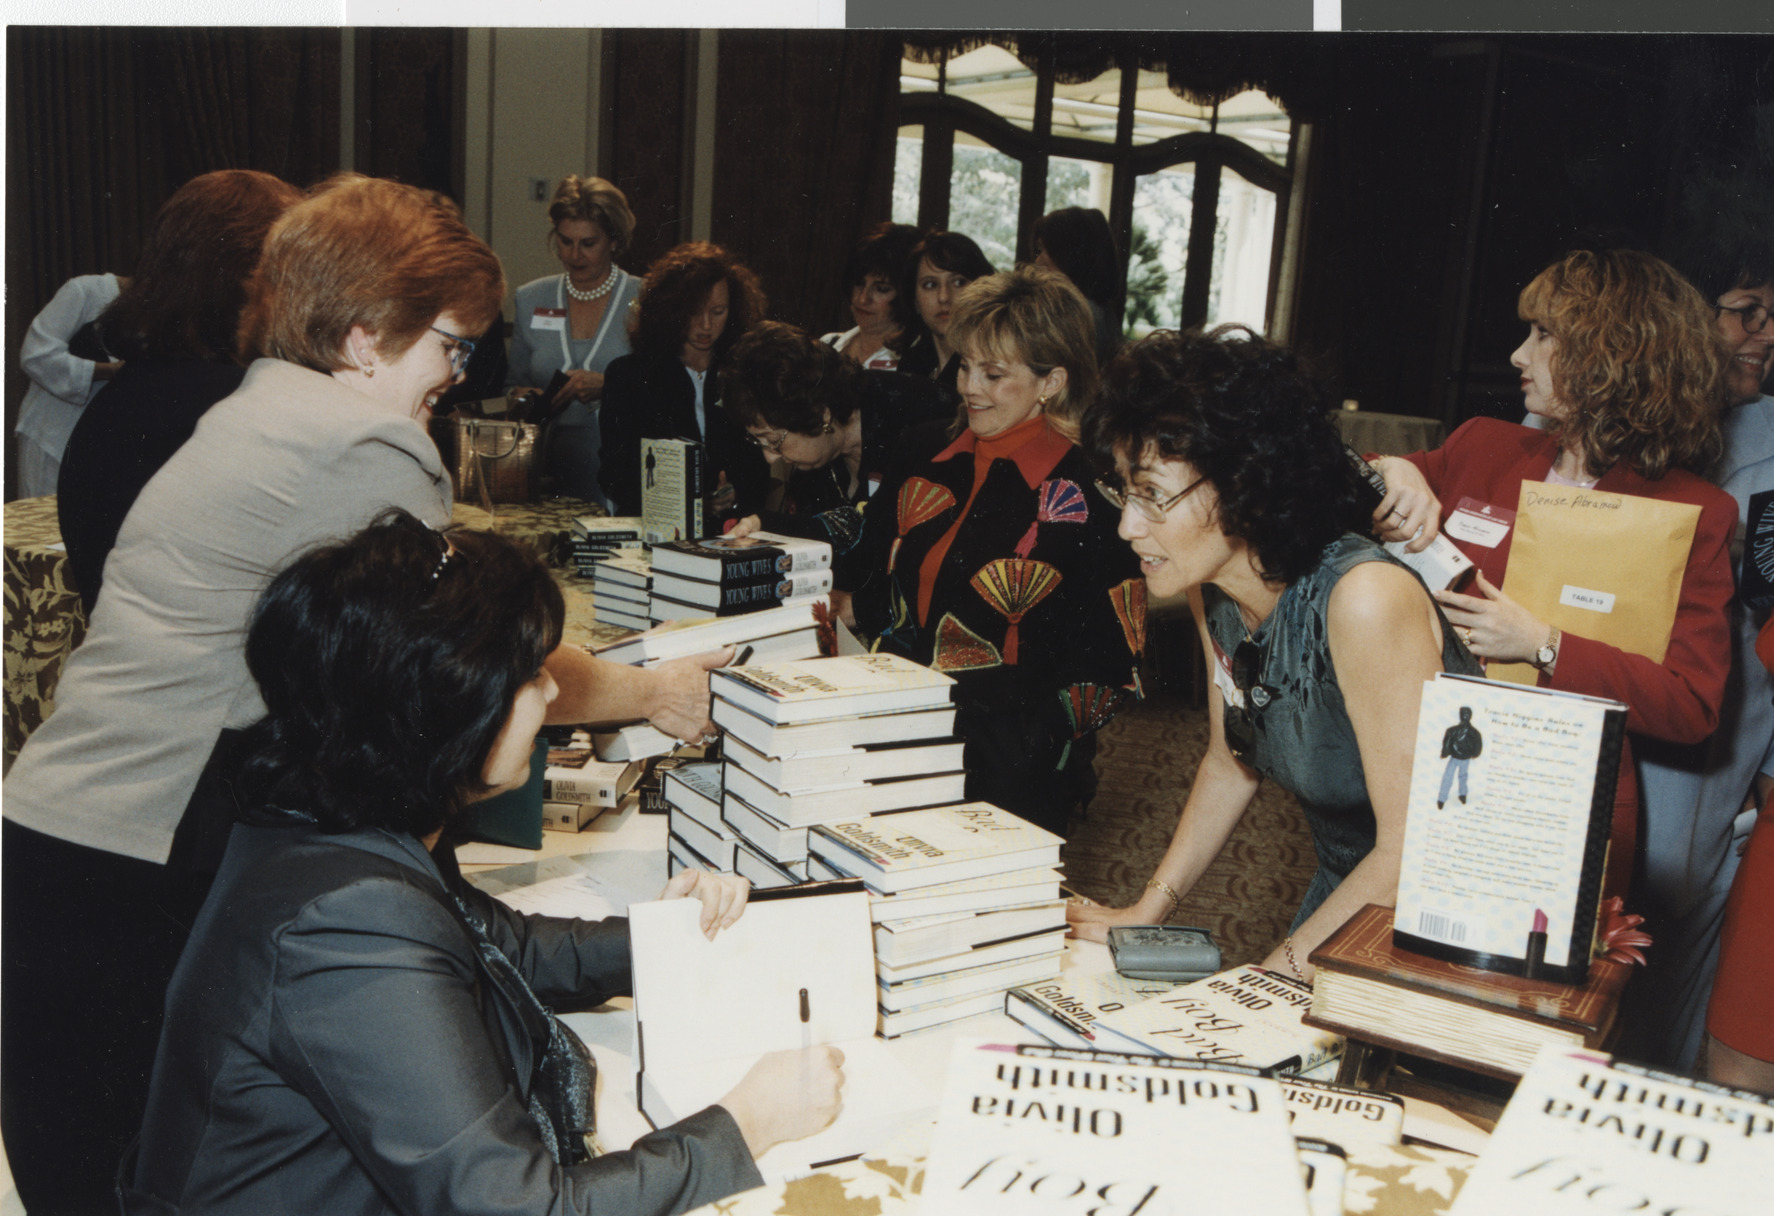 Photograph of a book signing by author Olivia Goldsmith